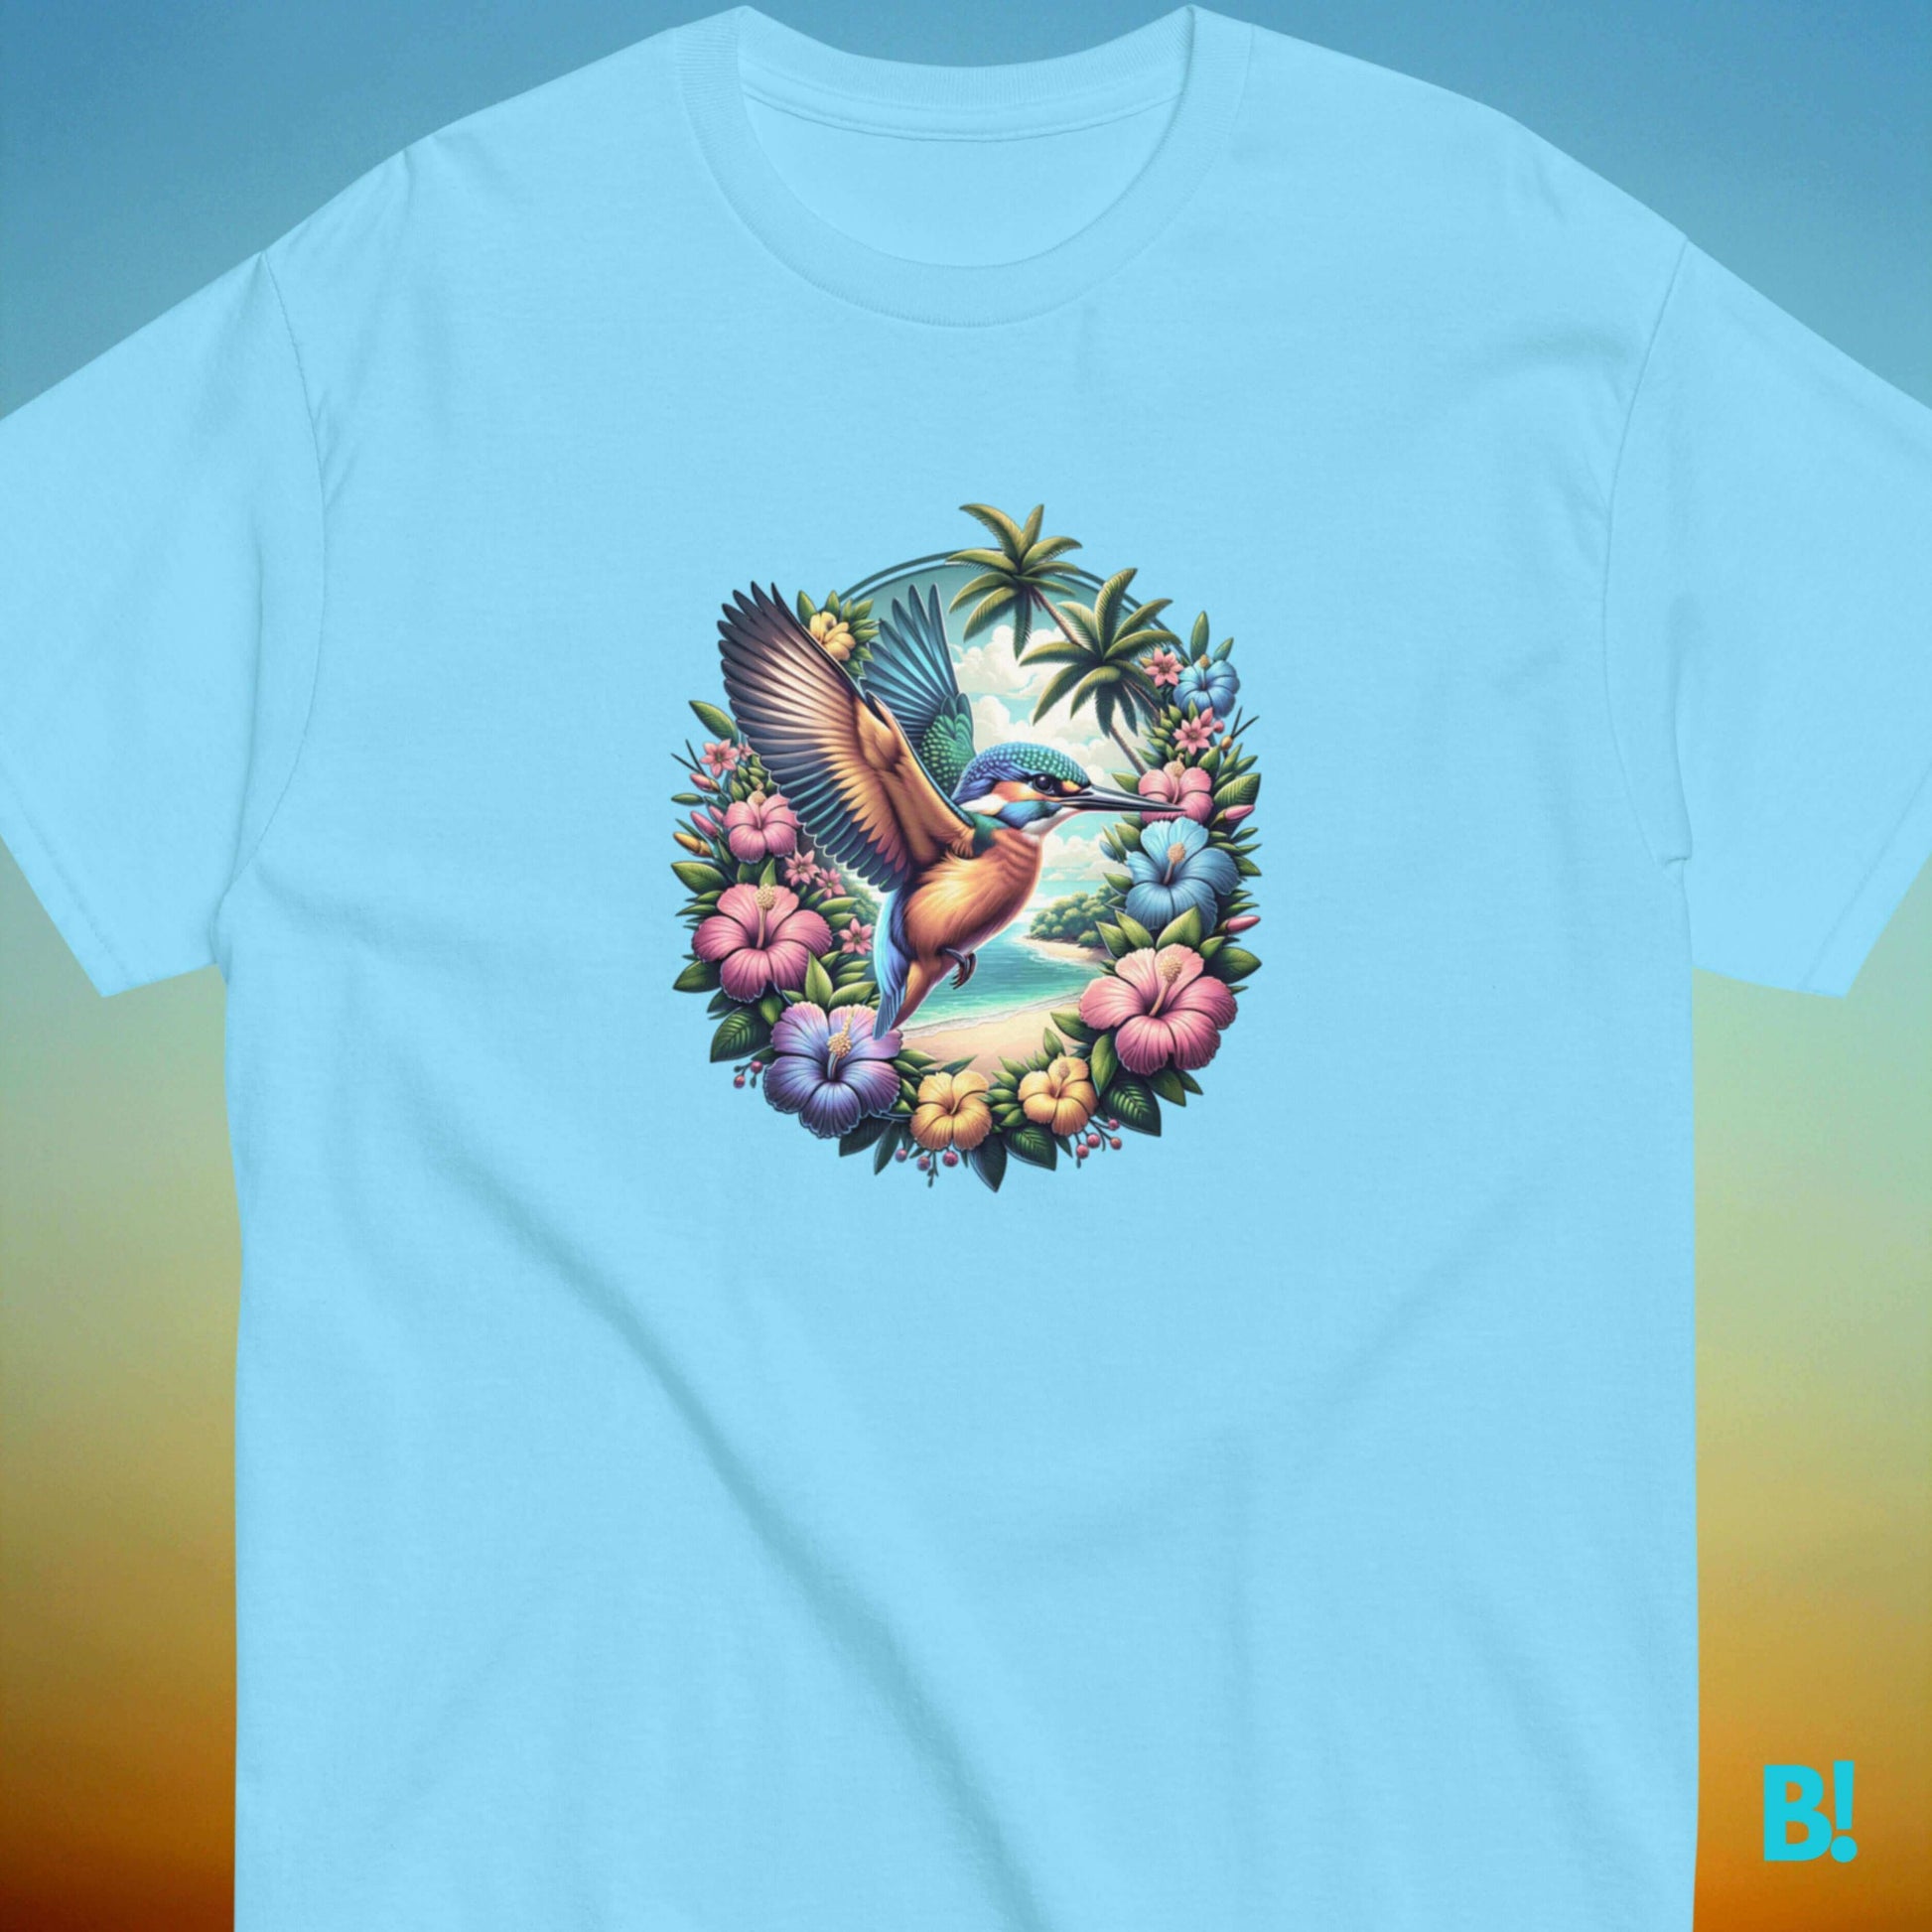 Embrace Summer with KINGFISHER T-Shirt - B!NKY Comfywear Dive into summer with the KINGFISHER T-Shirt. 100% Cotton, unisex, available in S-XXXL. Brighten your wardrobe with nature’s elegance. €29.50 B!NKY Comfywear